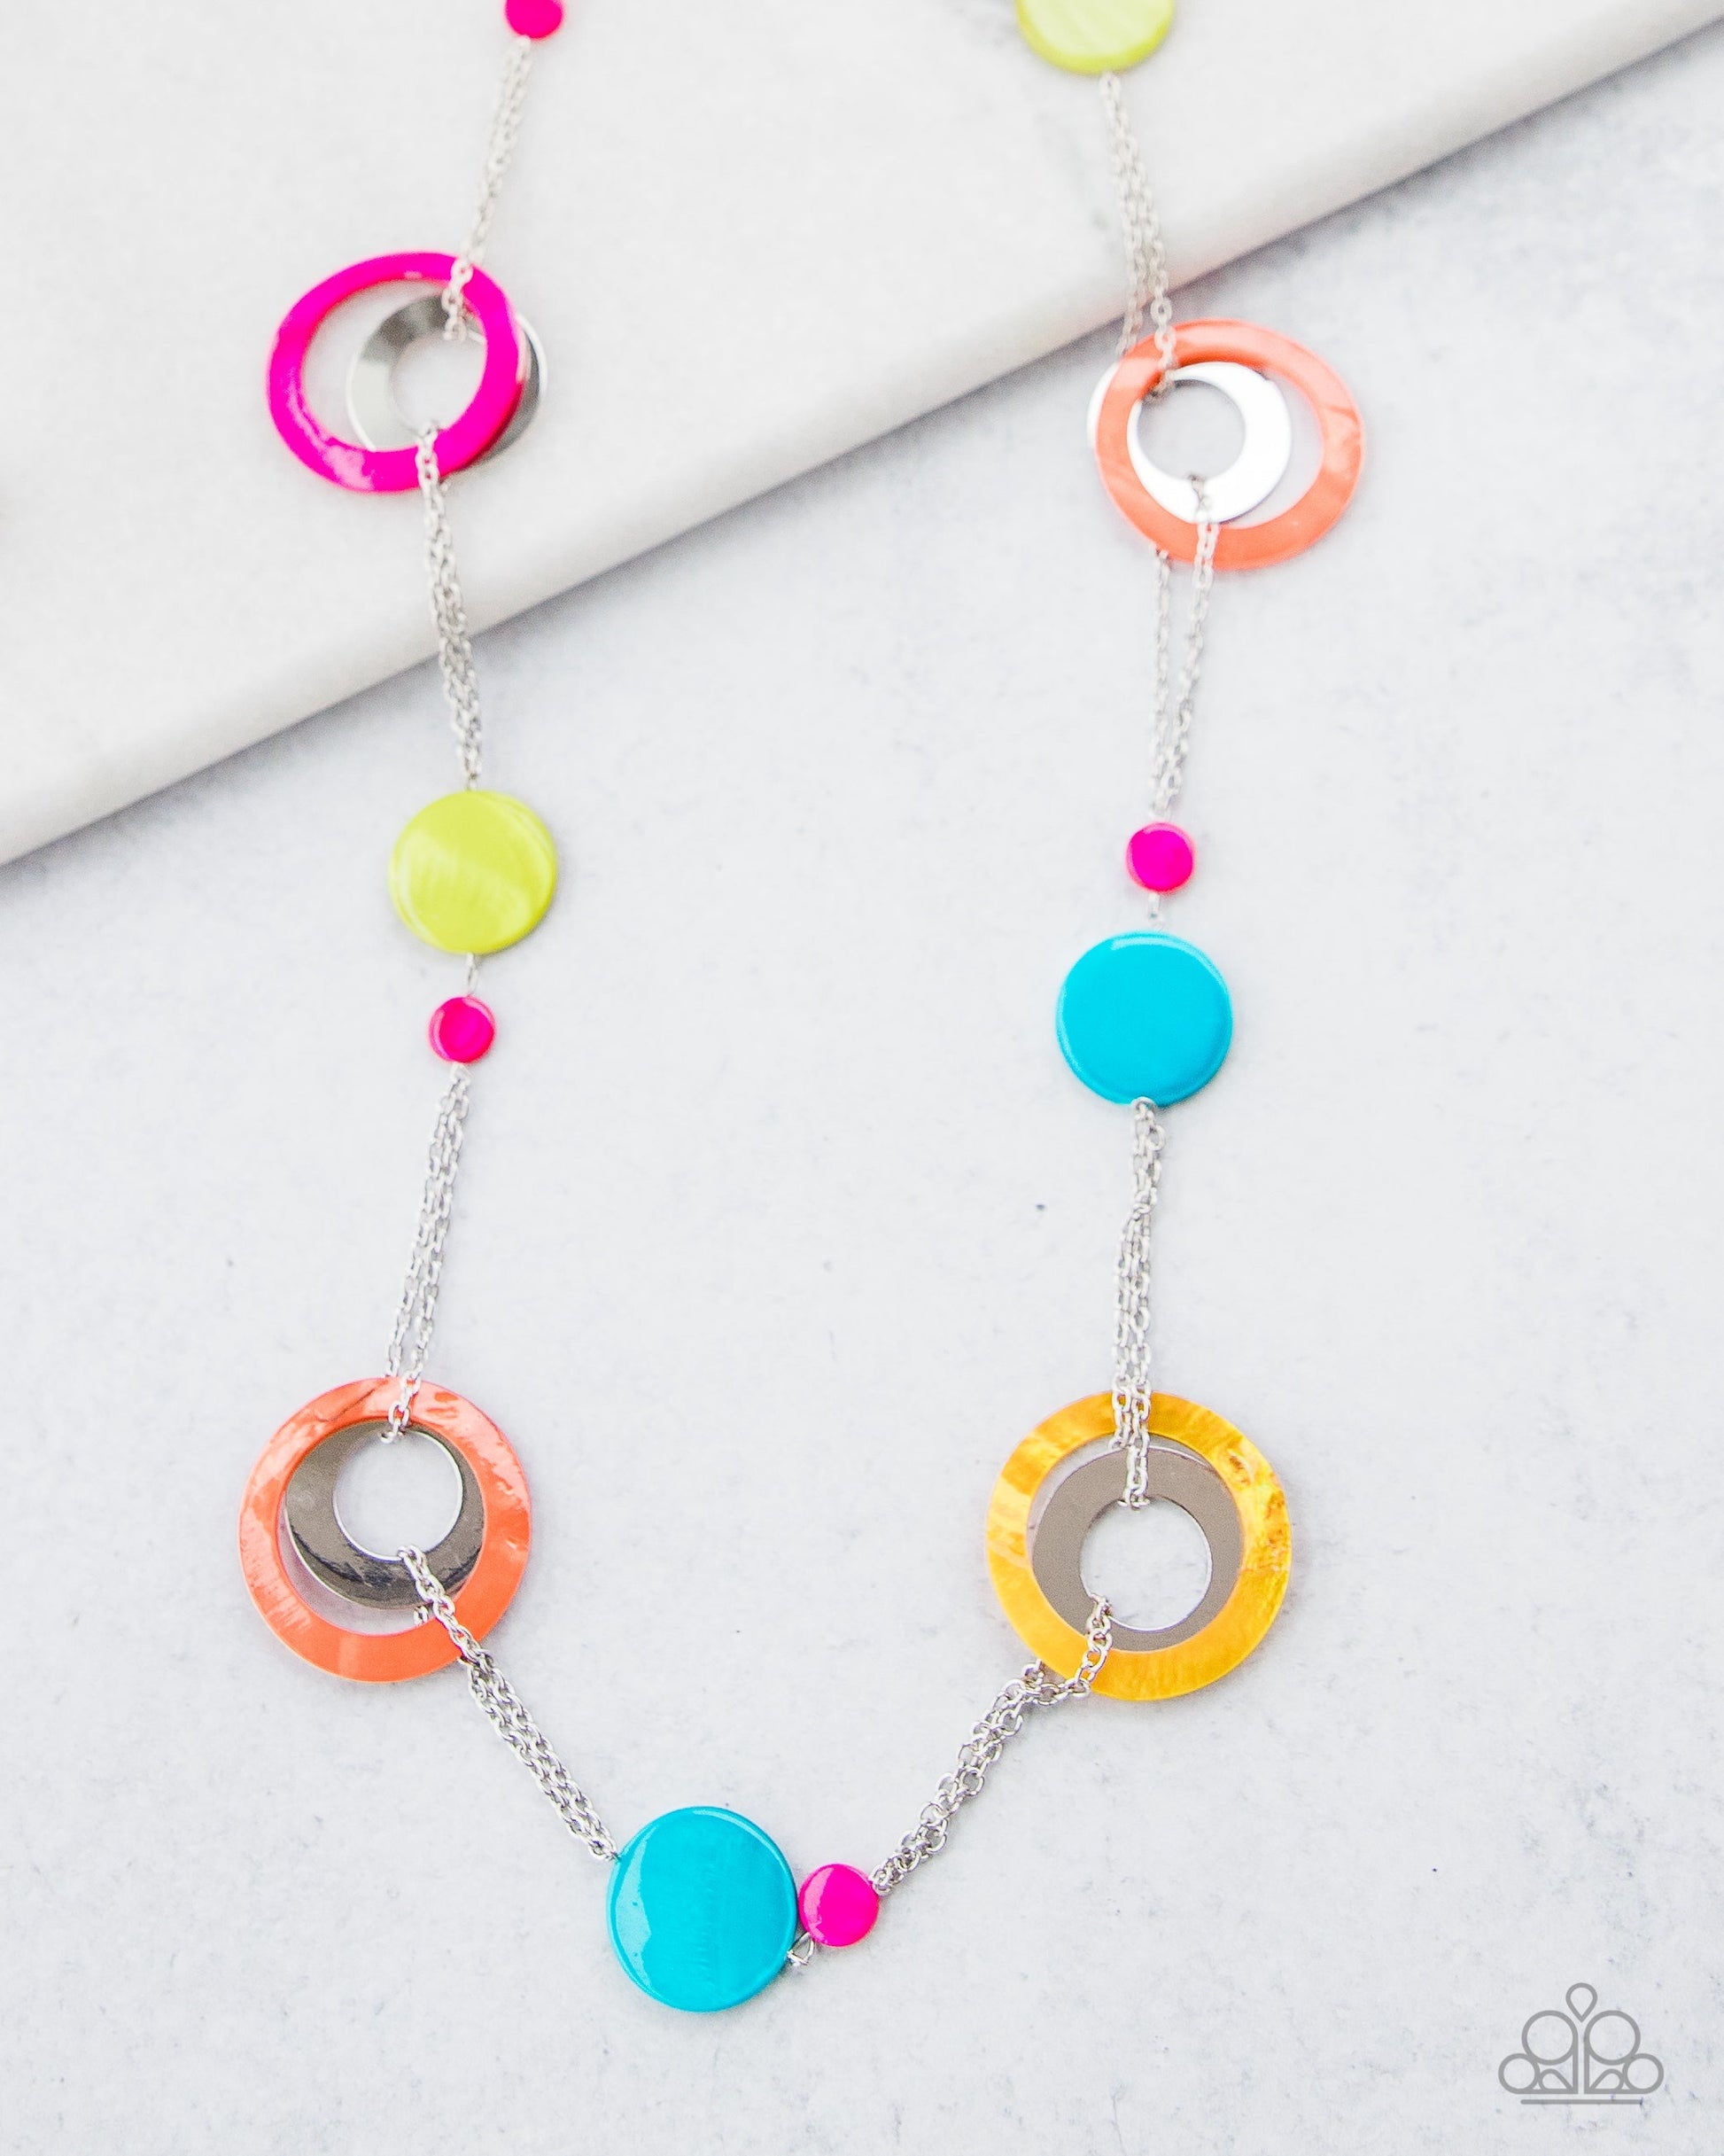 Kaleidoscopically Captivating - Multi Color Fashion Necklace - Casual and colorful fashion necklace. It has chunky brightly-colored rings and discs with swirly marble finishes join thick metal hoops to climb a simple silver chain and create a retro style.